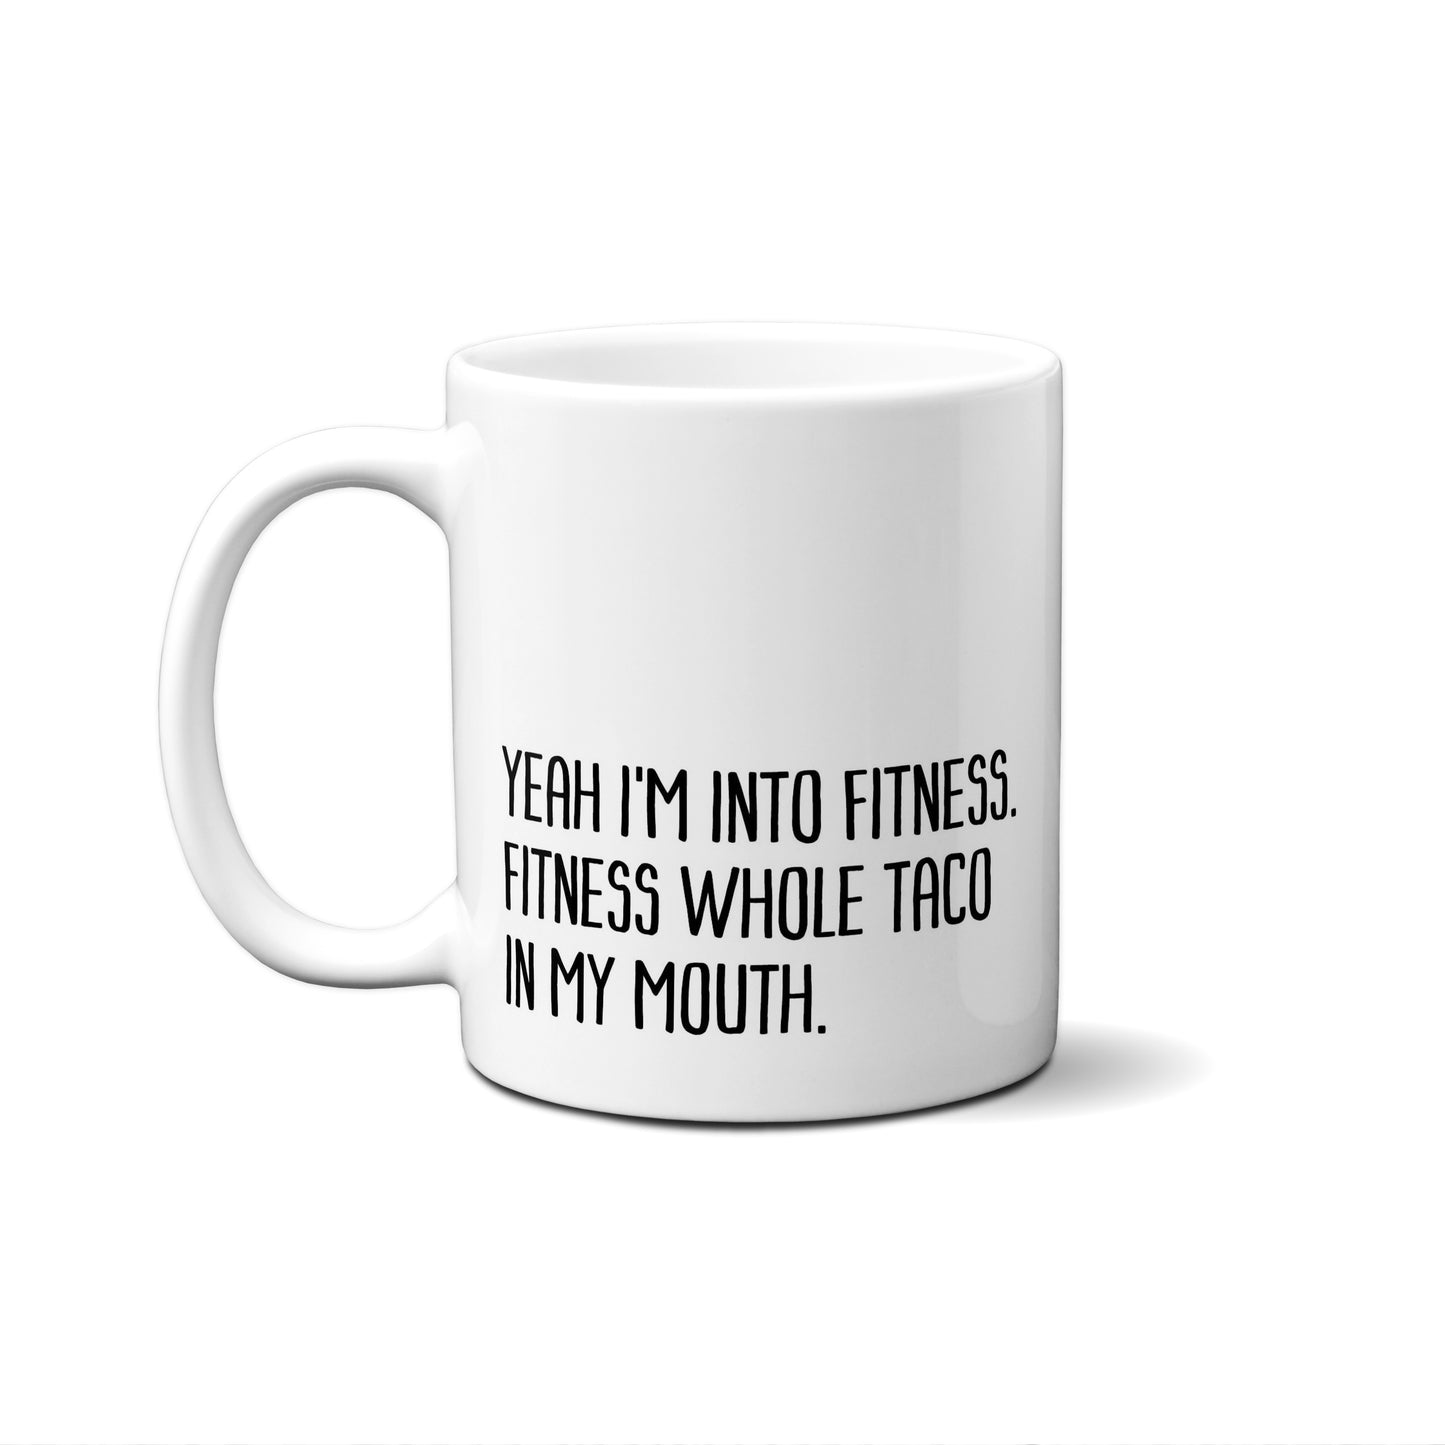 Yeah I'm Into Fitness. Fitness Whole Taco In My Mouth. Quote Mug